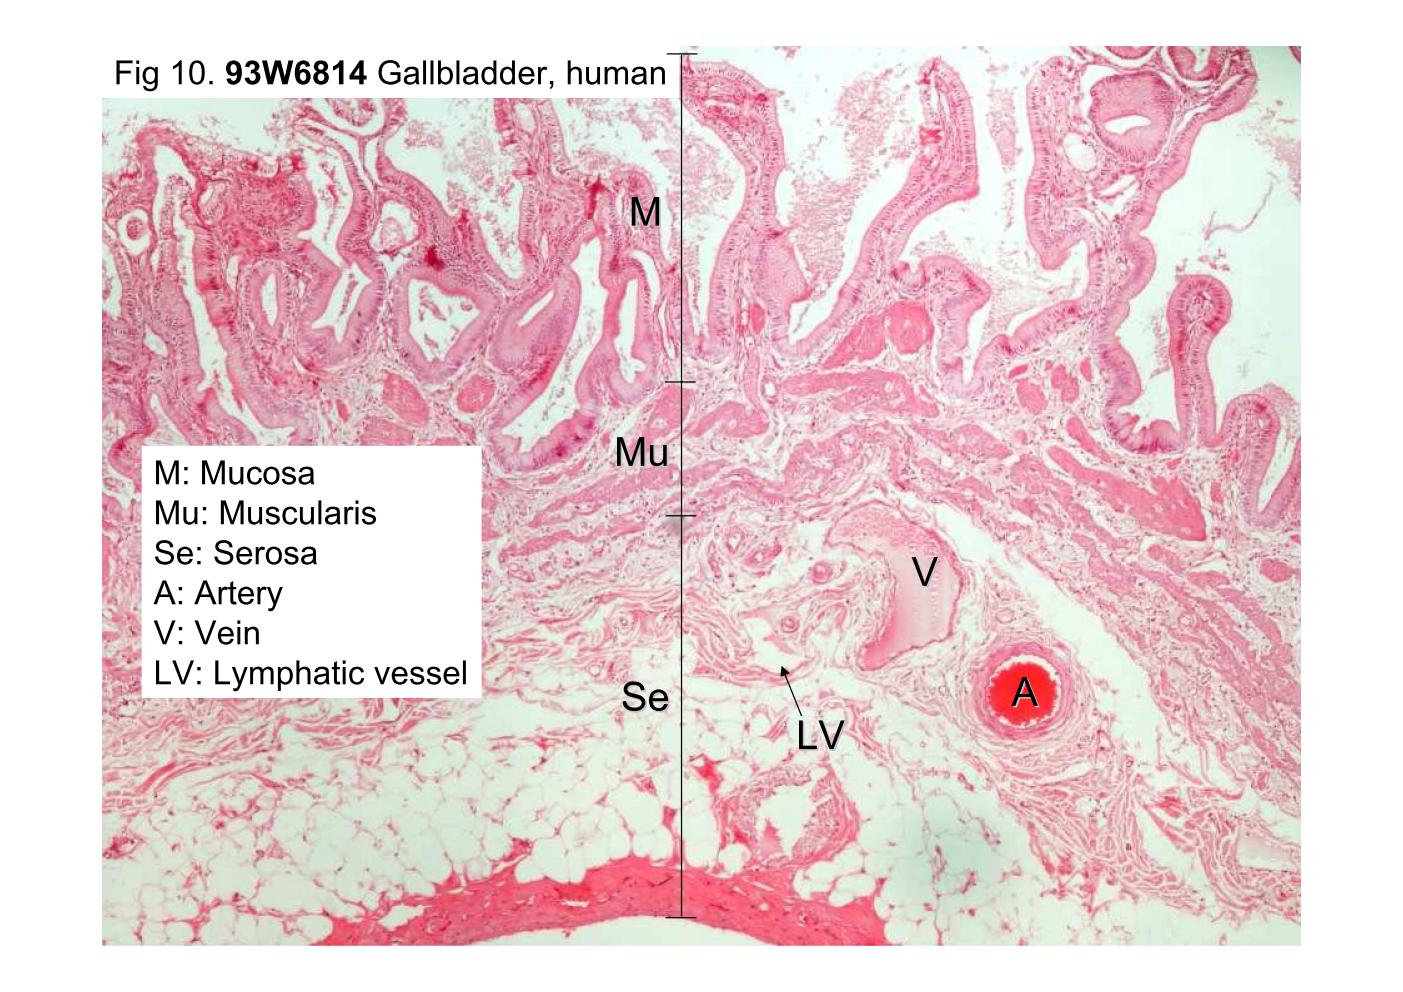 block10-2_23.jpg - Fig 10. 93W6814, Gallbladder, human, H&E.The wall of the gallbladder is composed of a mucosa (M),muscularis (Mu) and serosa (Se). The mucosa is thrown intonumerous folds. The muscularis consists of interlacing bundlesof smooth muscle. The serosa consists of irregular denseconnective tissue through which the artery (A), vein (V), andlymphatic vessel (LV) travel; and containing abundant adiposetissue.